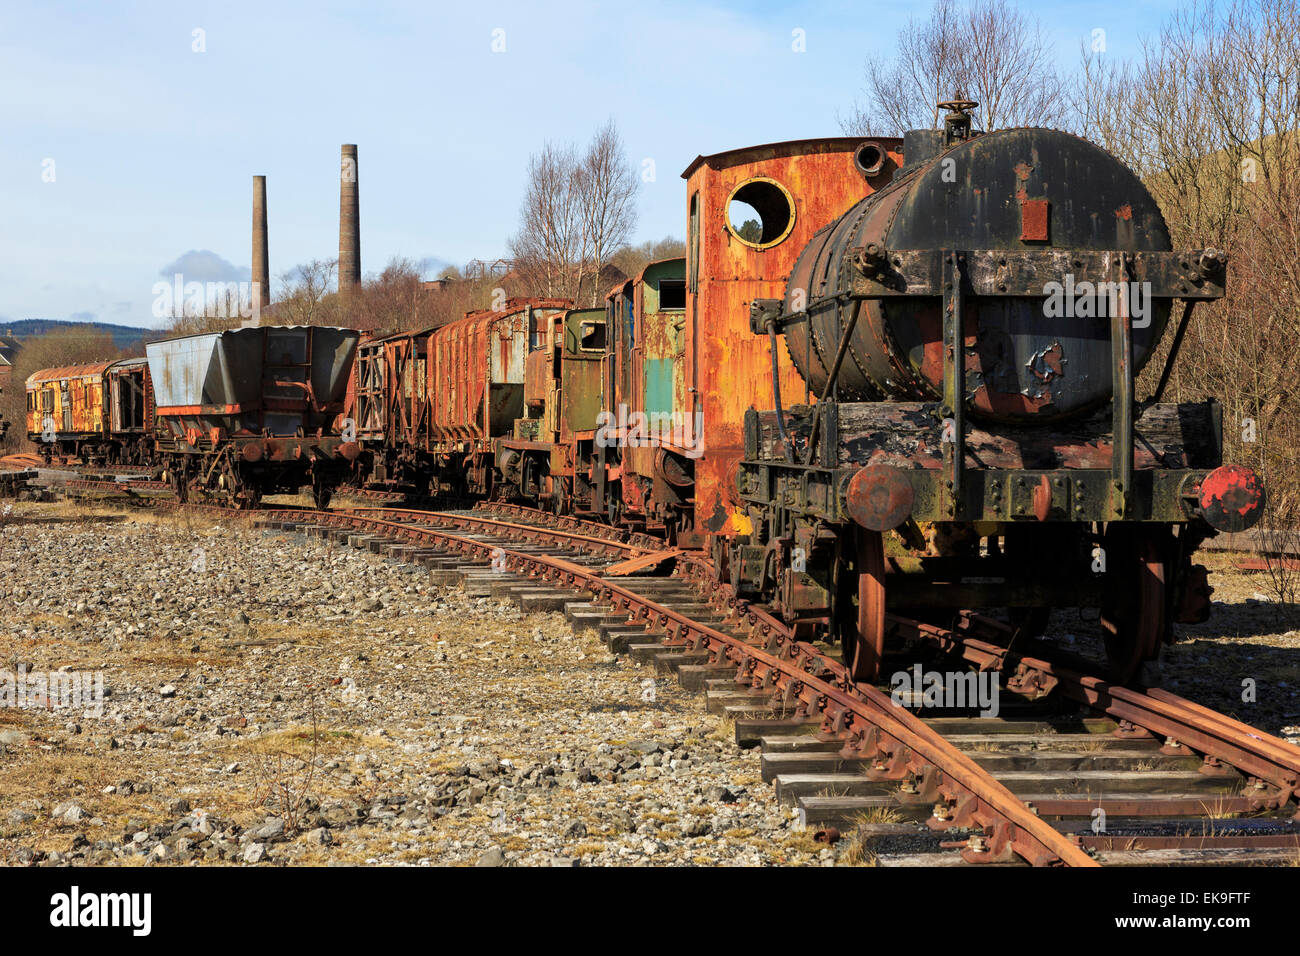 Old and abandoned rusting steam trains and railway carriages, Ayrshire, Scotland, UK Stock Photo